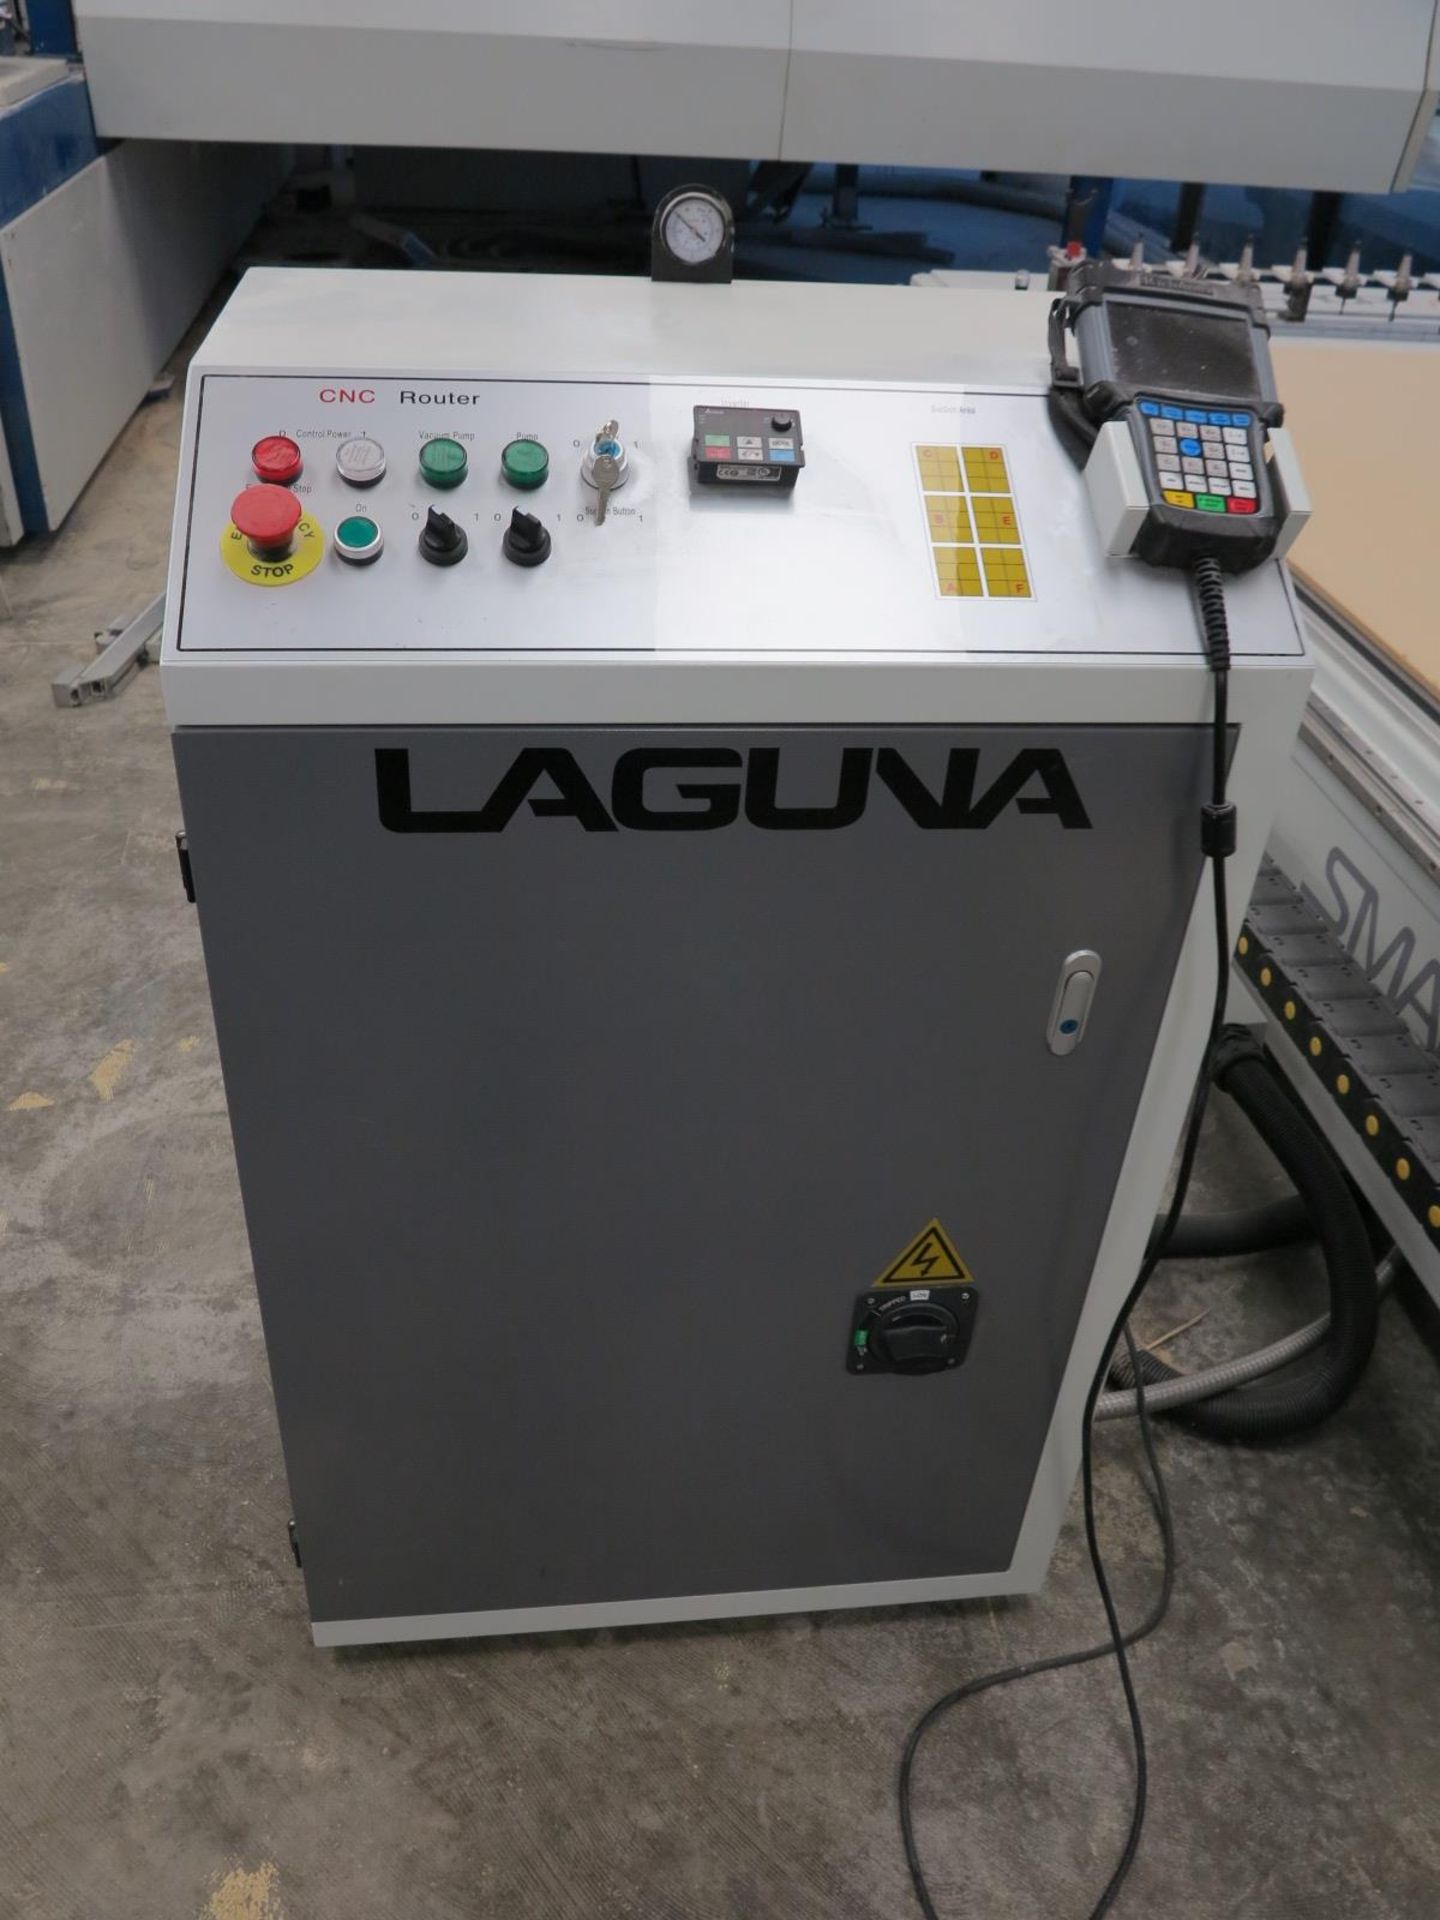 2018 LAGUNA SMARTSHOP M CNC ROUTER, 8 POSITION AUTOMATIC TOOL RACK, SINGLE SPINDLE 5.5 HP HEAD, ( - Image 3 of 6